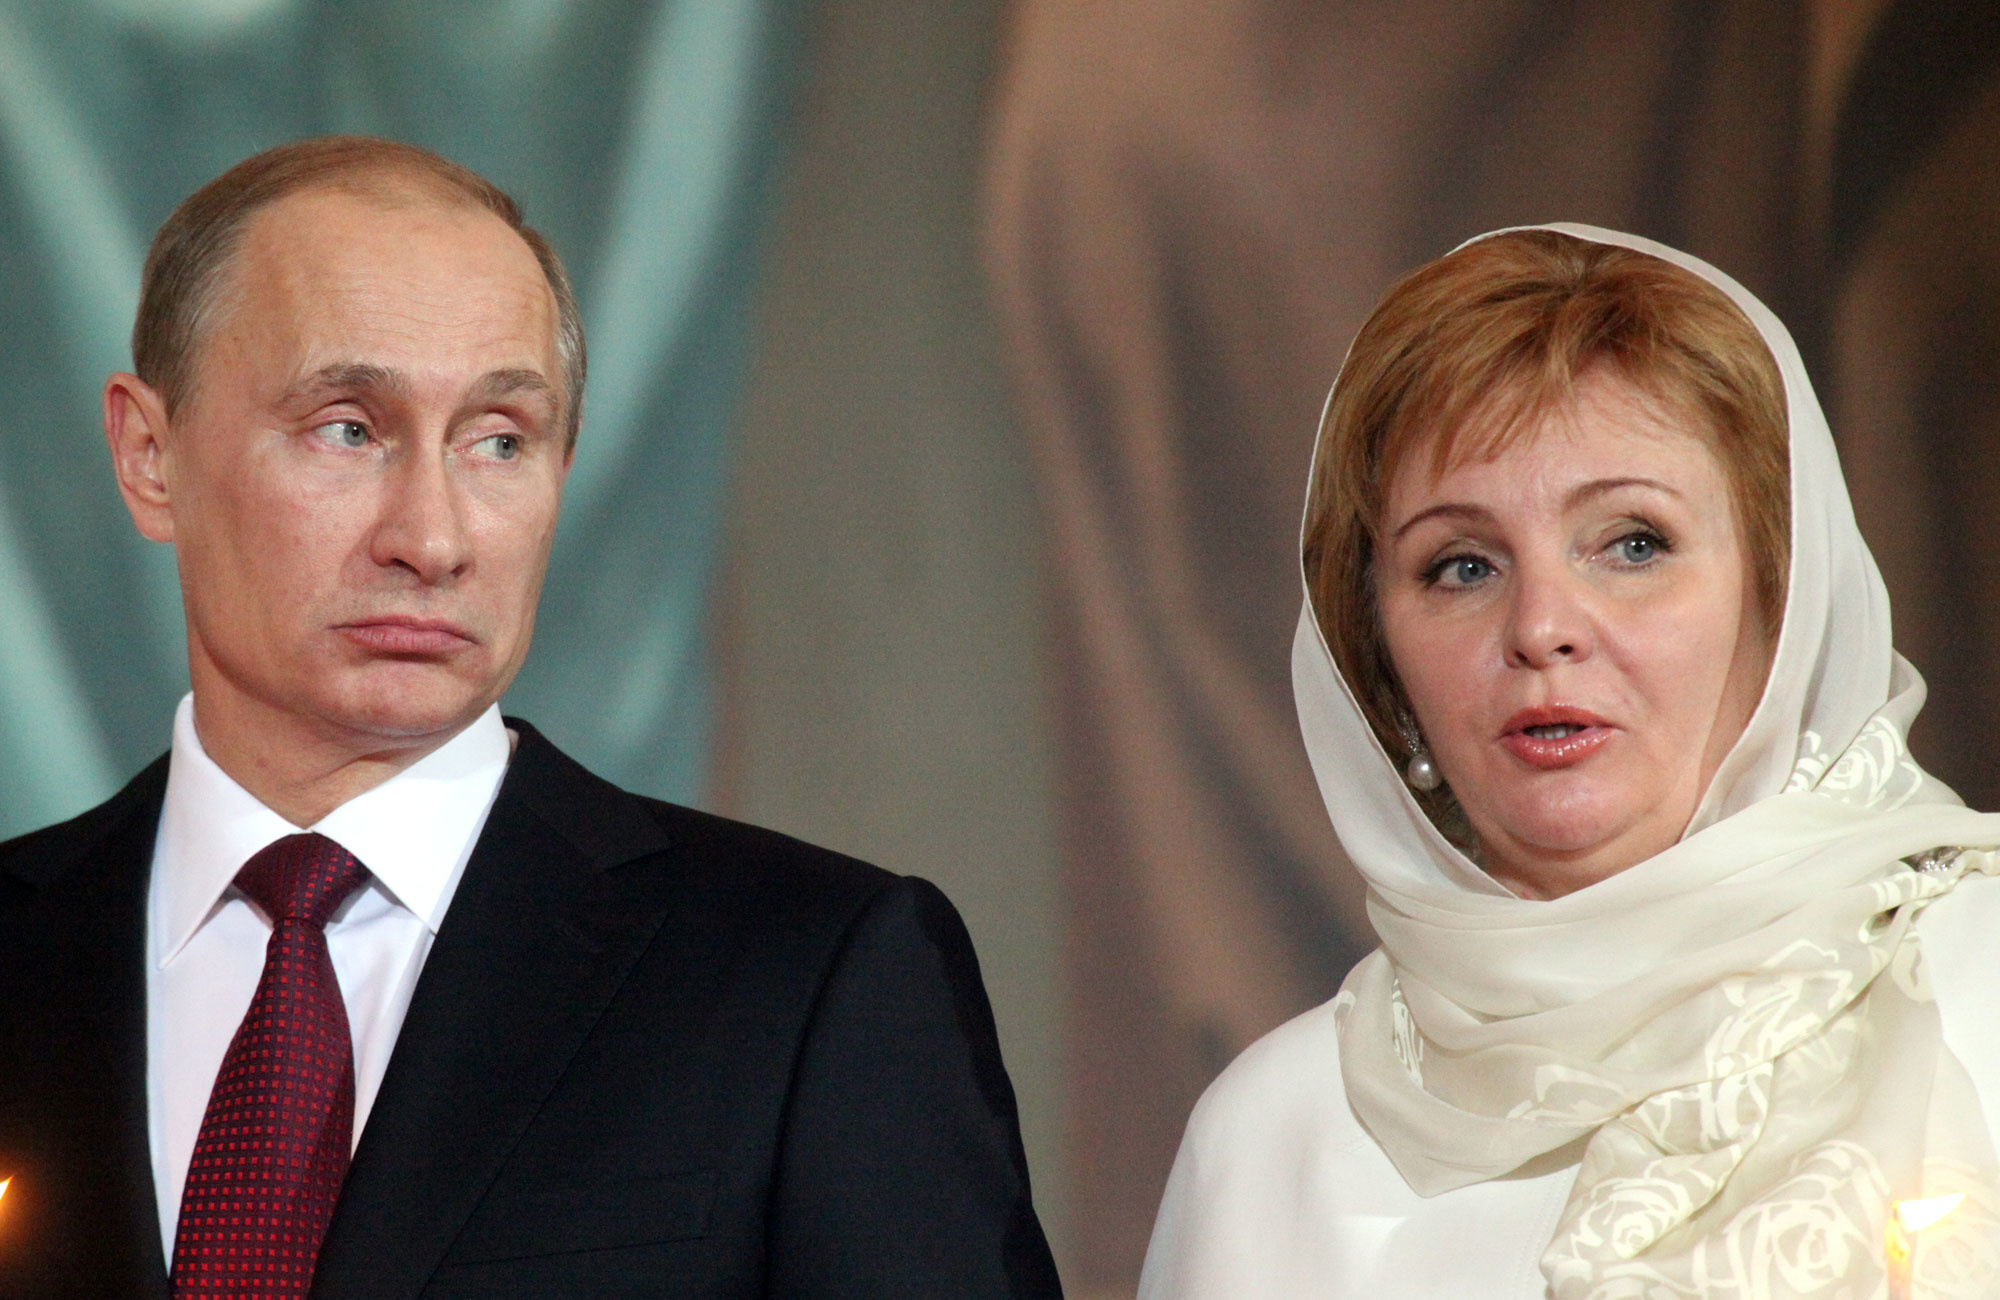 Putin and his ex-wife Ludmila, Reuters